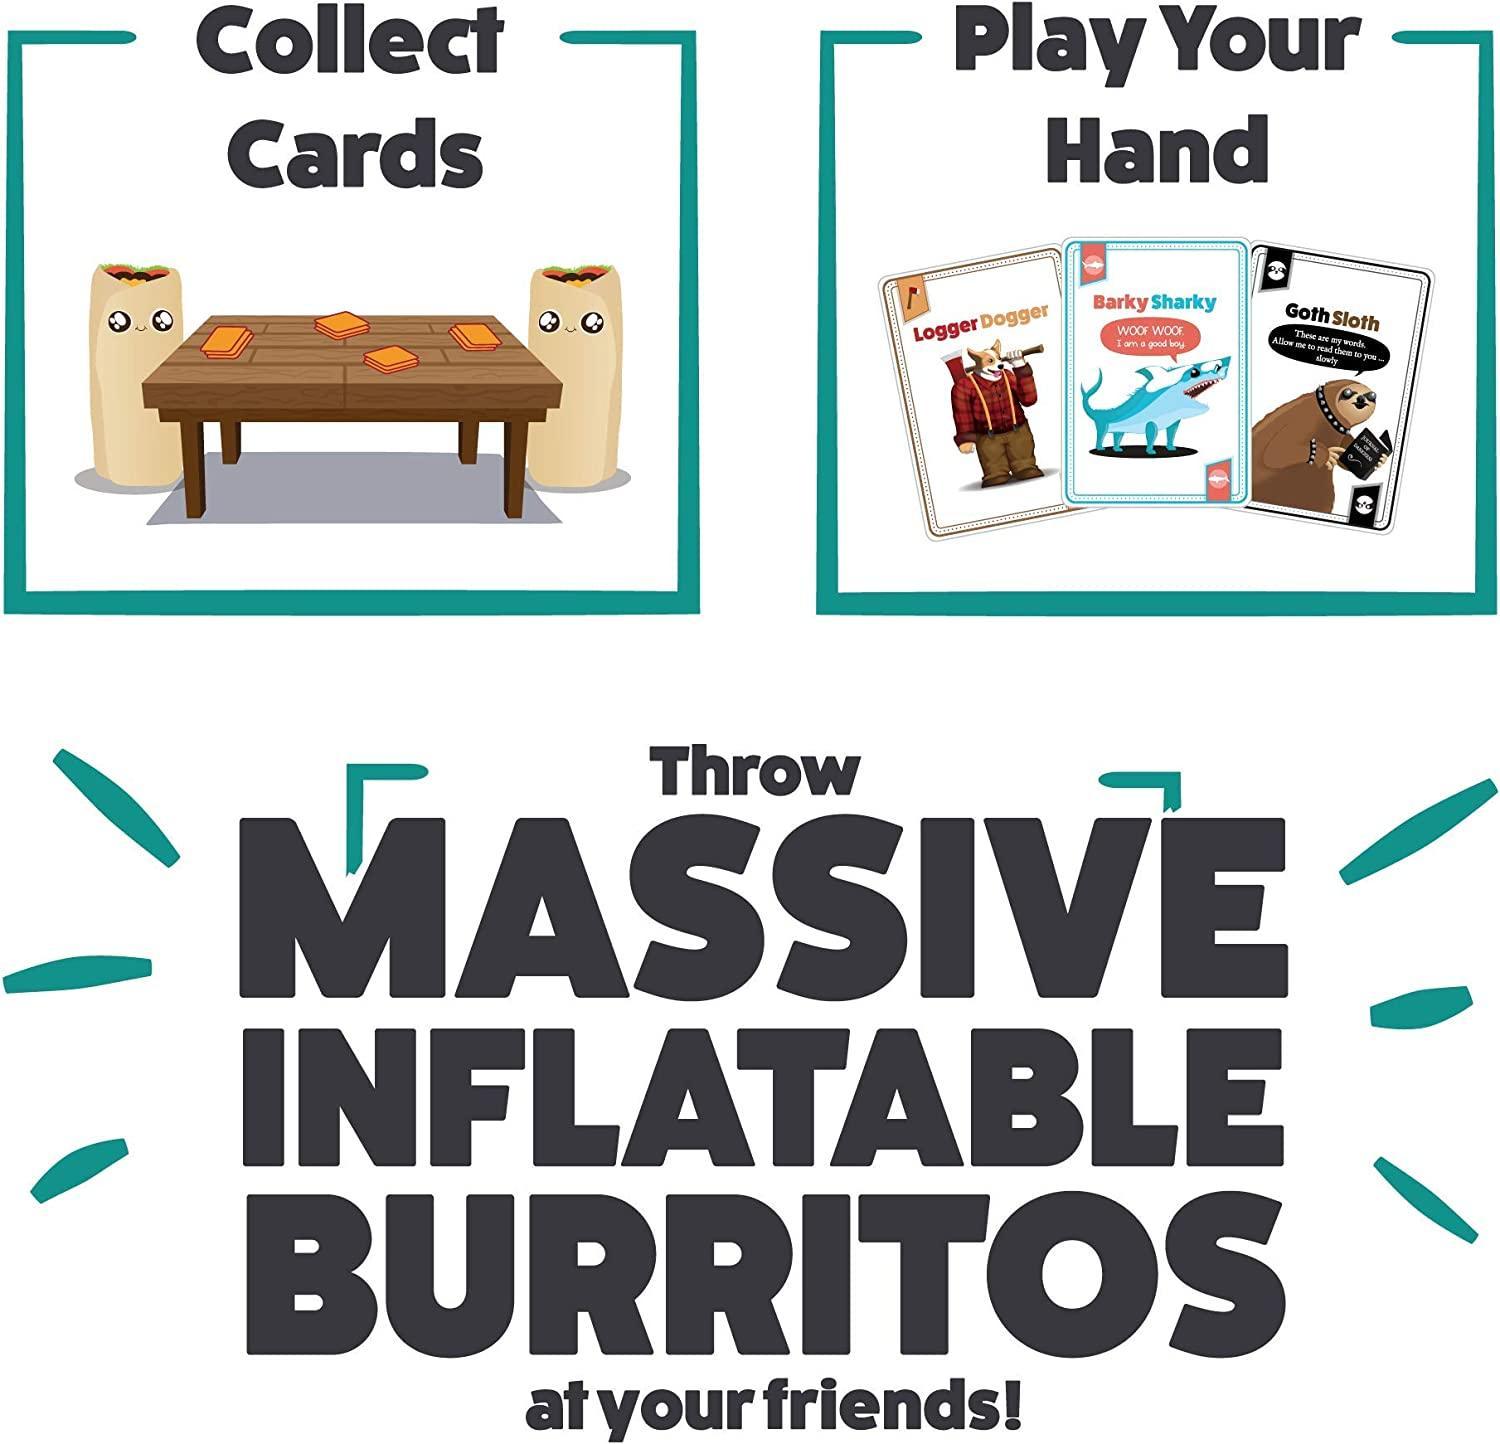 Throw Throw Burrito Extreme Outdoor Edition - Gaming Library